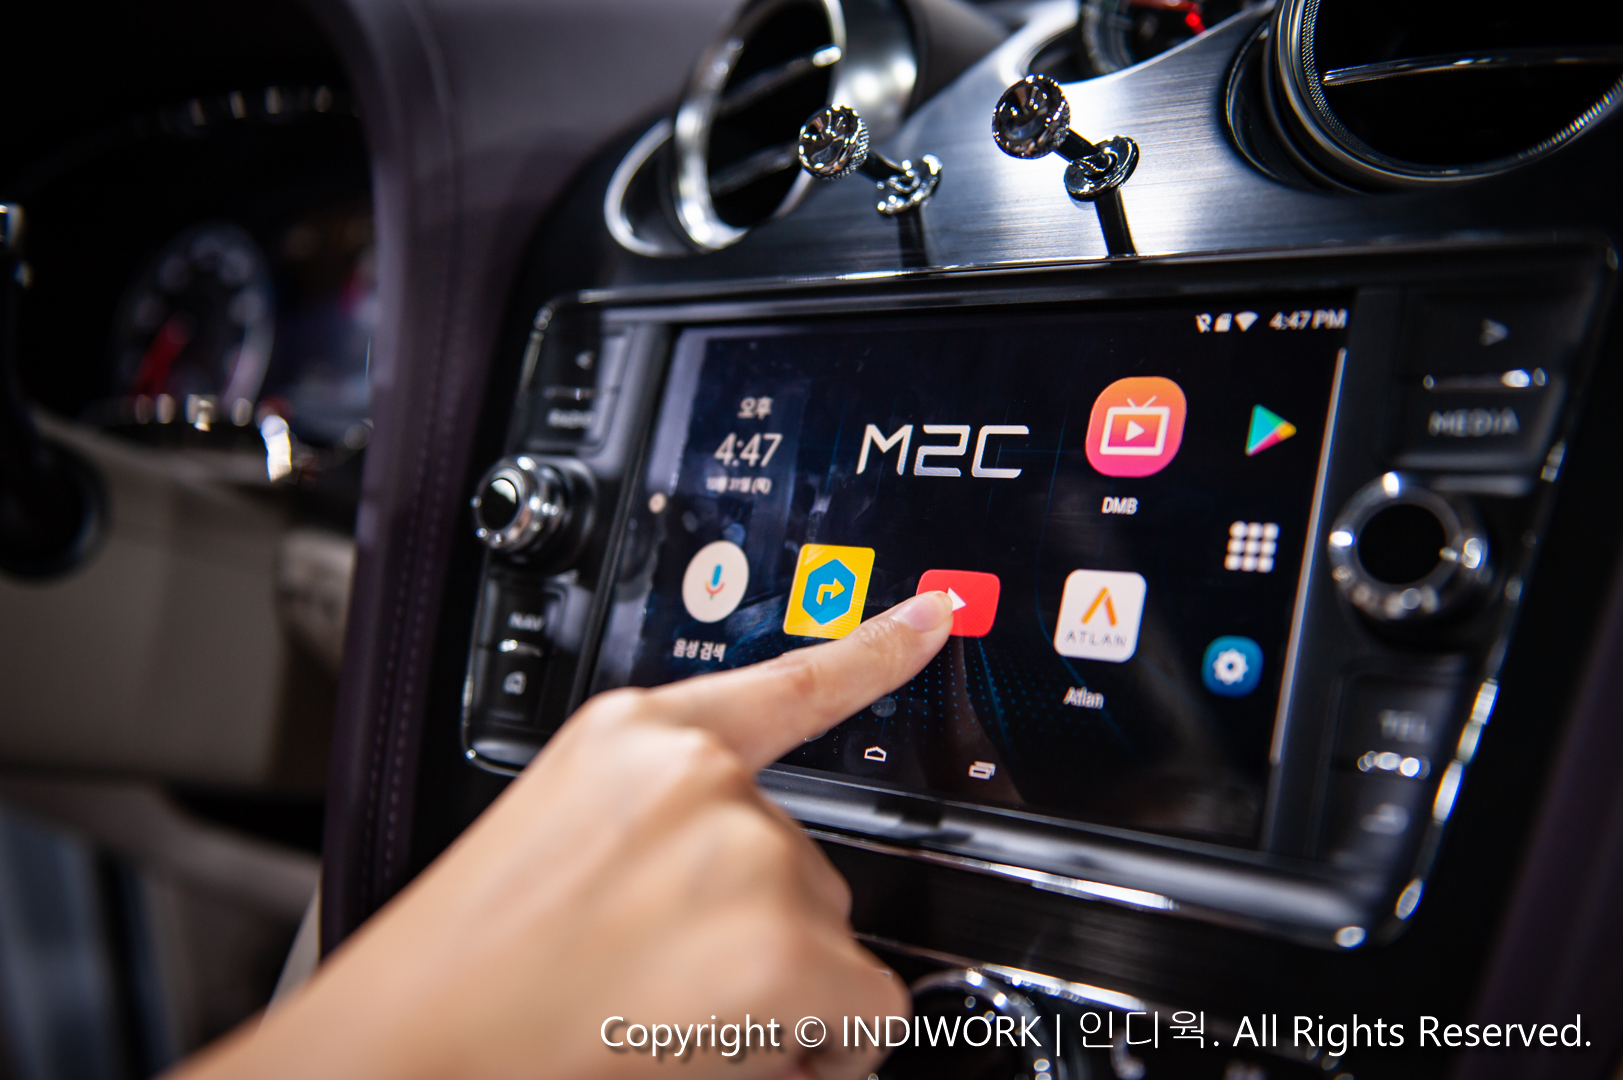 Android CAR PC system for 2019 Bentley bentayga "M2C-200A"